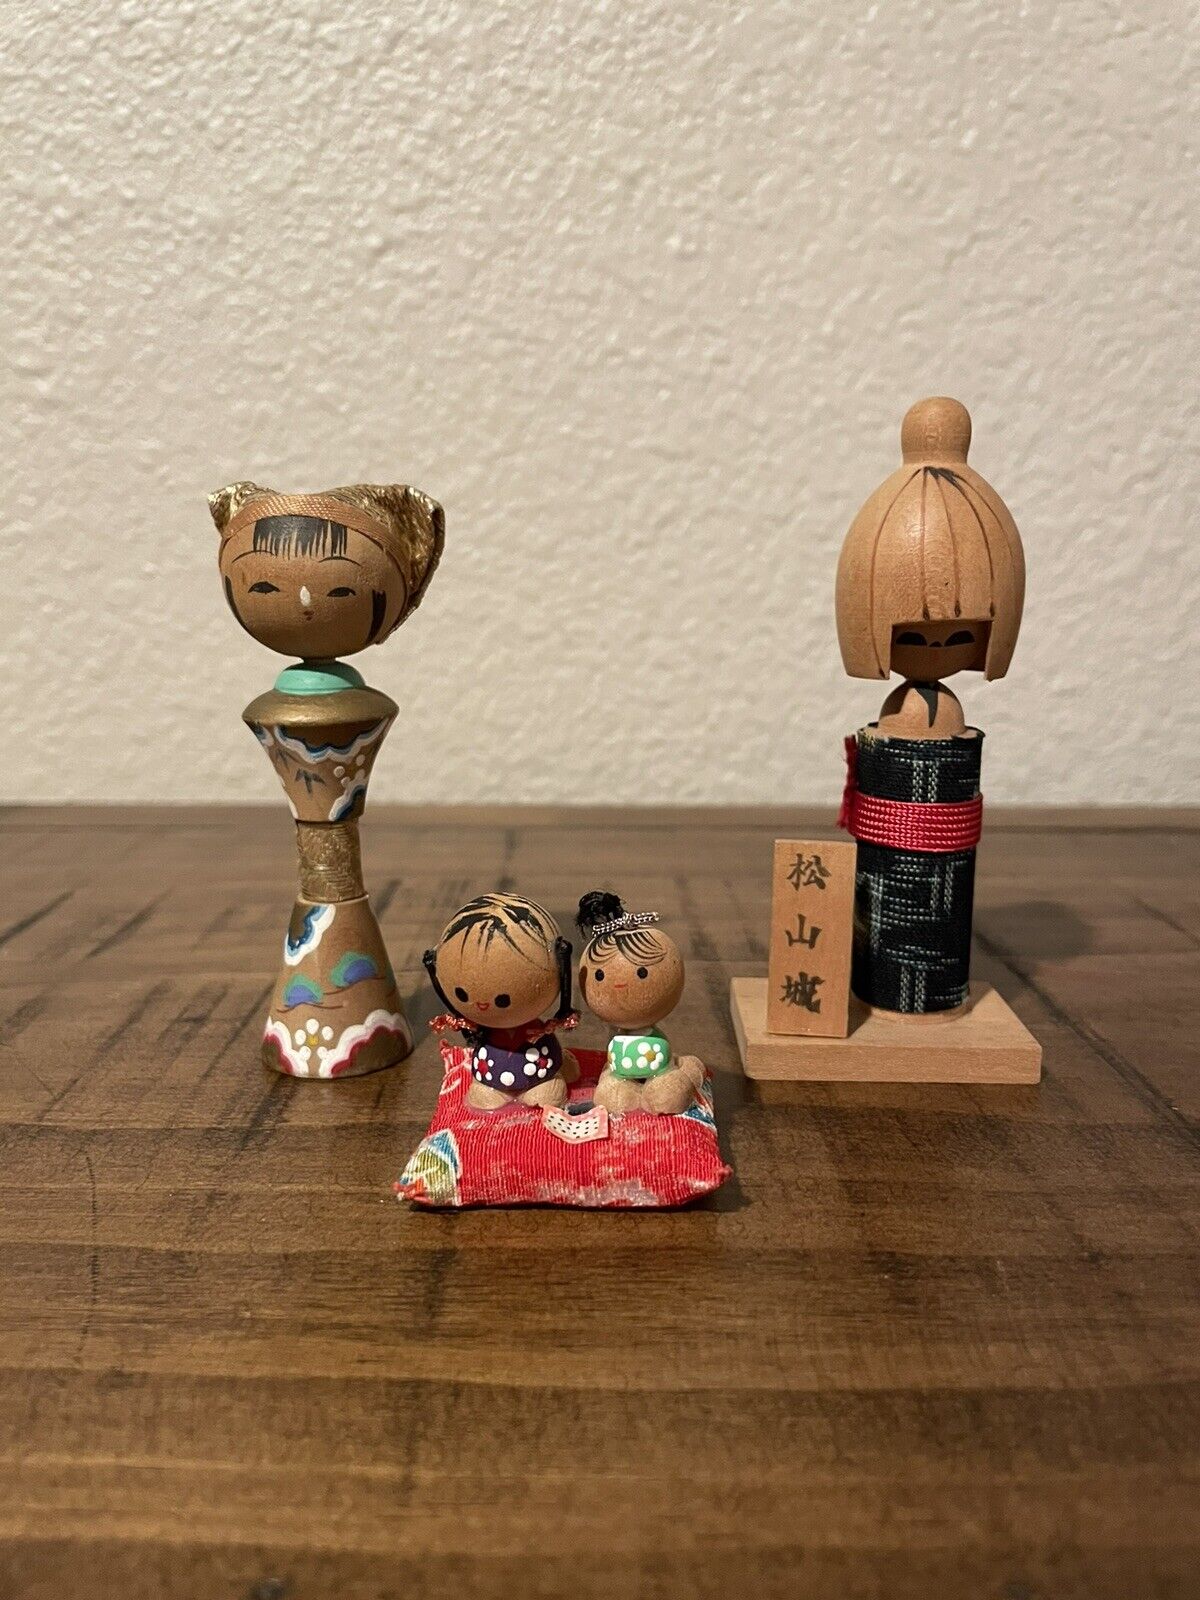 3 Vintage Kokeshi Dolls Signed by Artist Made in Japan